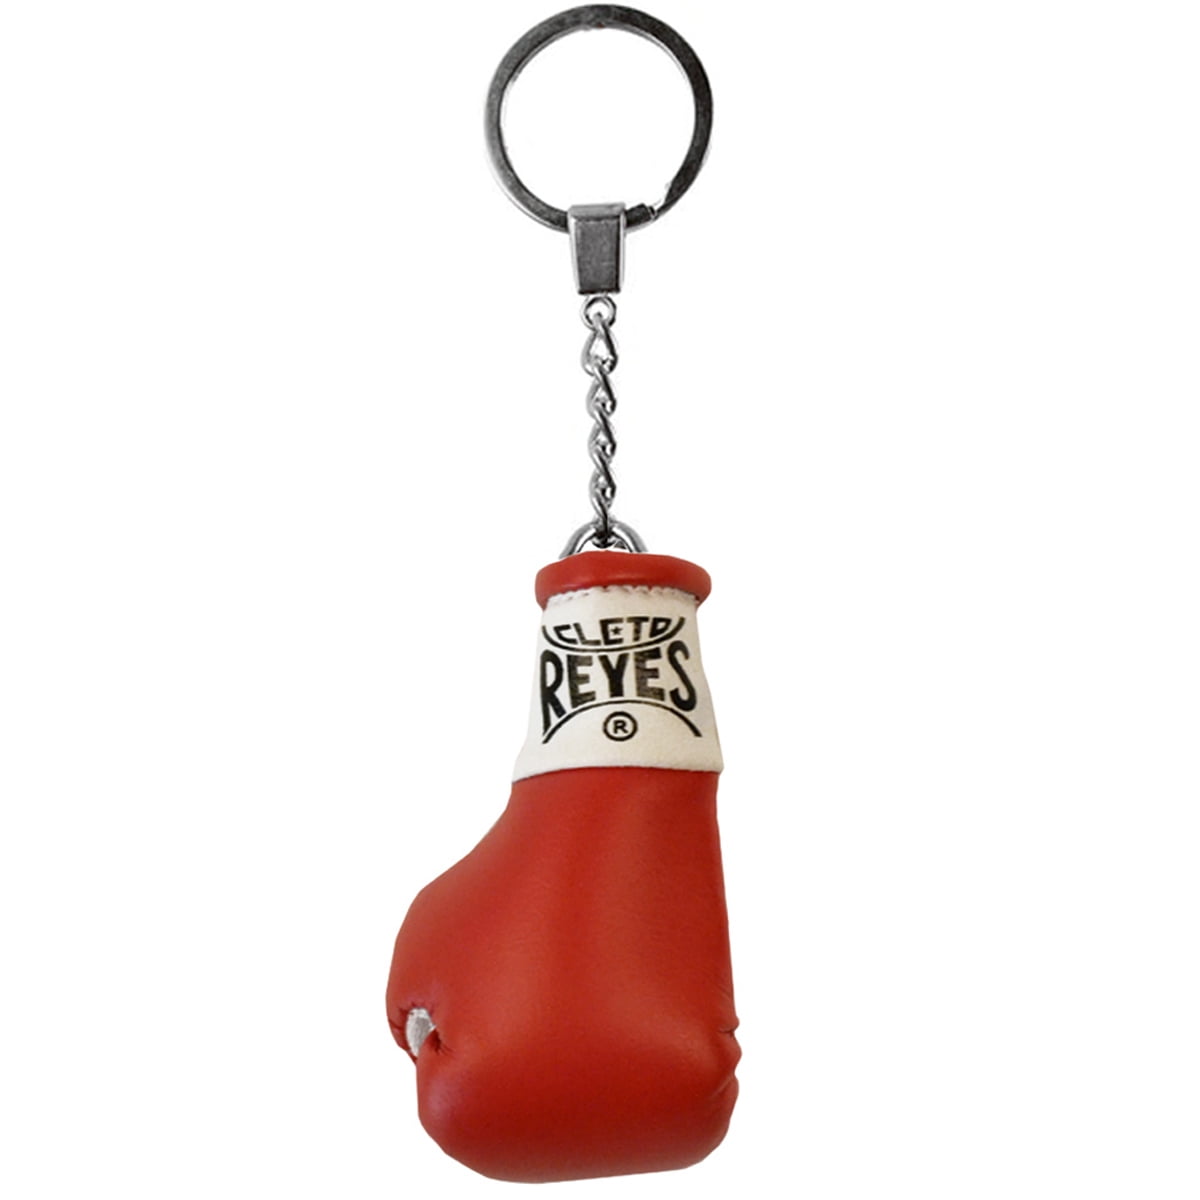 ENGLAND   KEY CHAIN MINI BOXING GLOVES FOR YOUR KEYS GIFT 